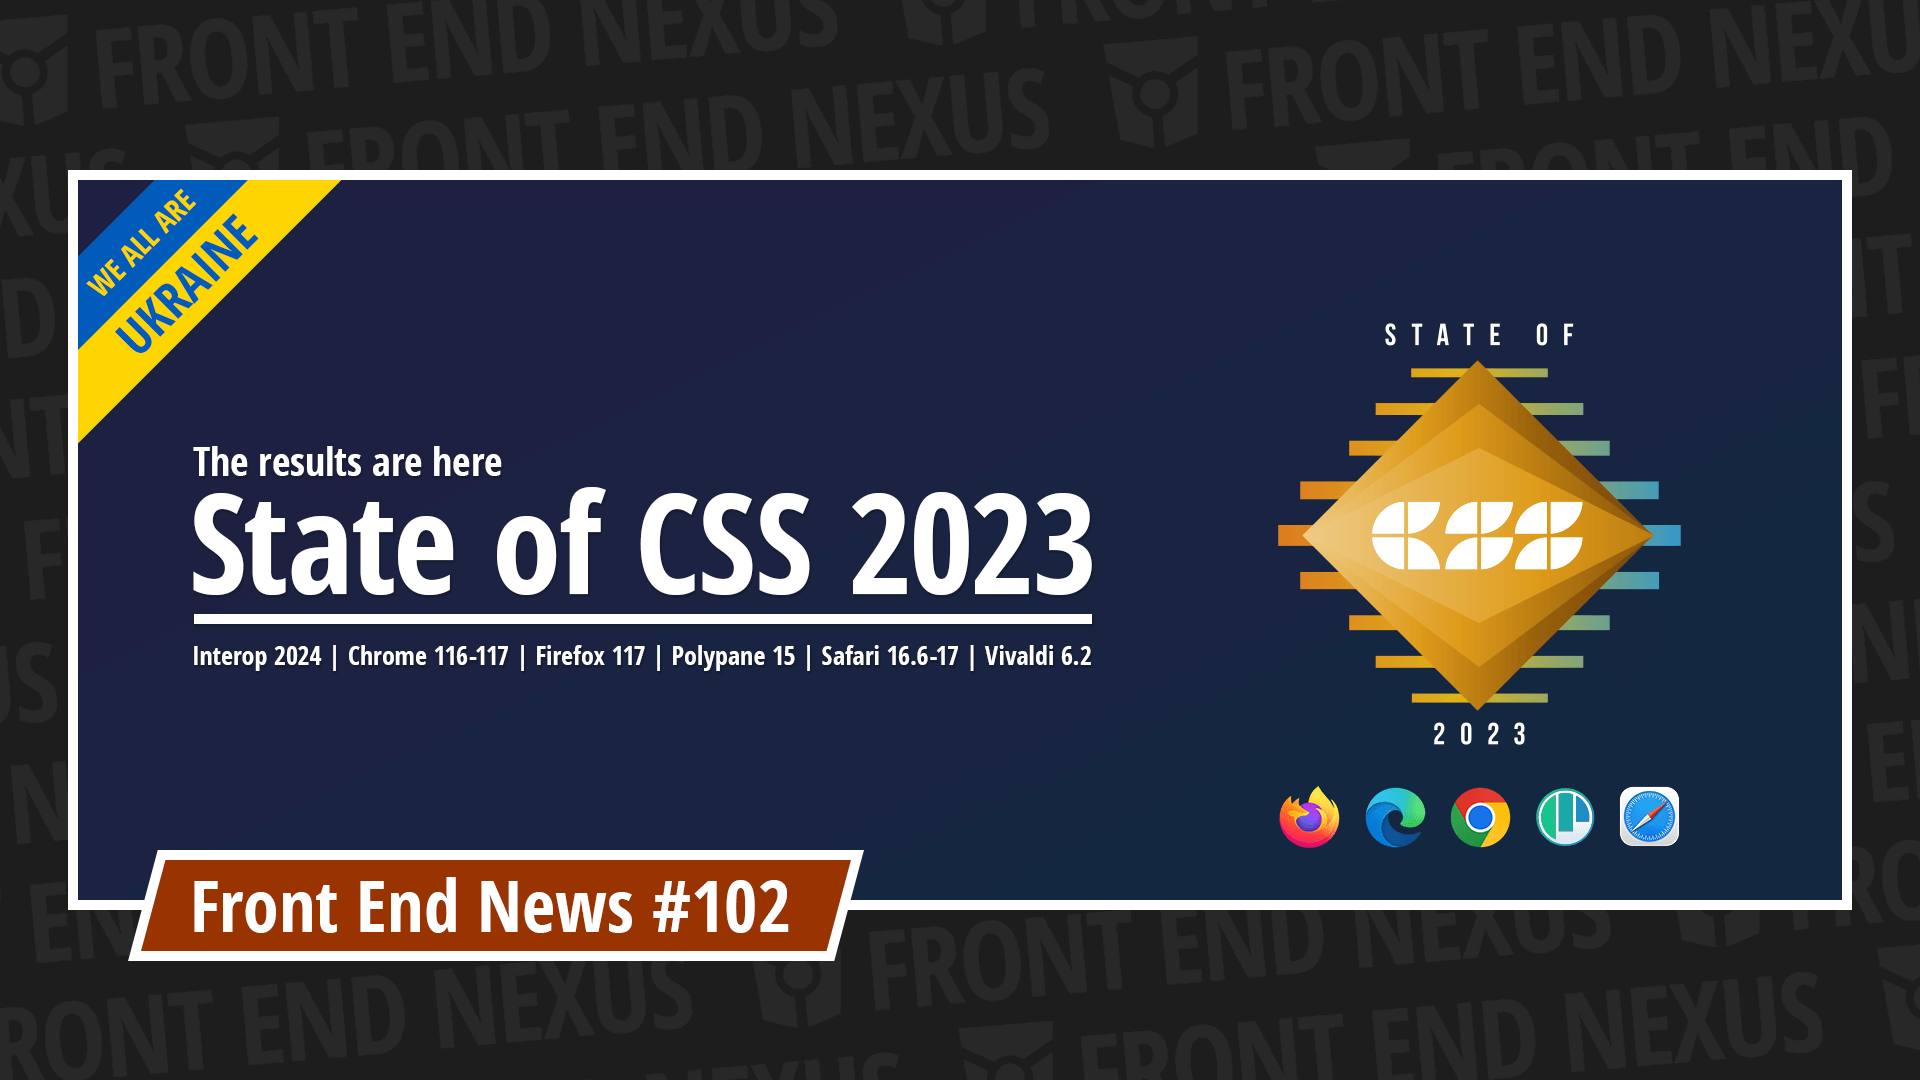 State of CSS 2023 Results, Interop 2024, Chrome 116-117, Firefox 117, Polypane 15, Safari 16.6-17, Vivaldi 6.2, and more | Front End News #102